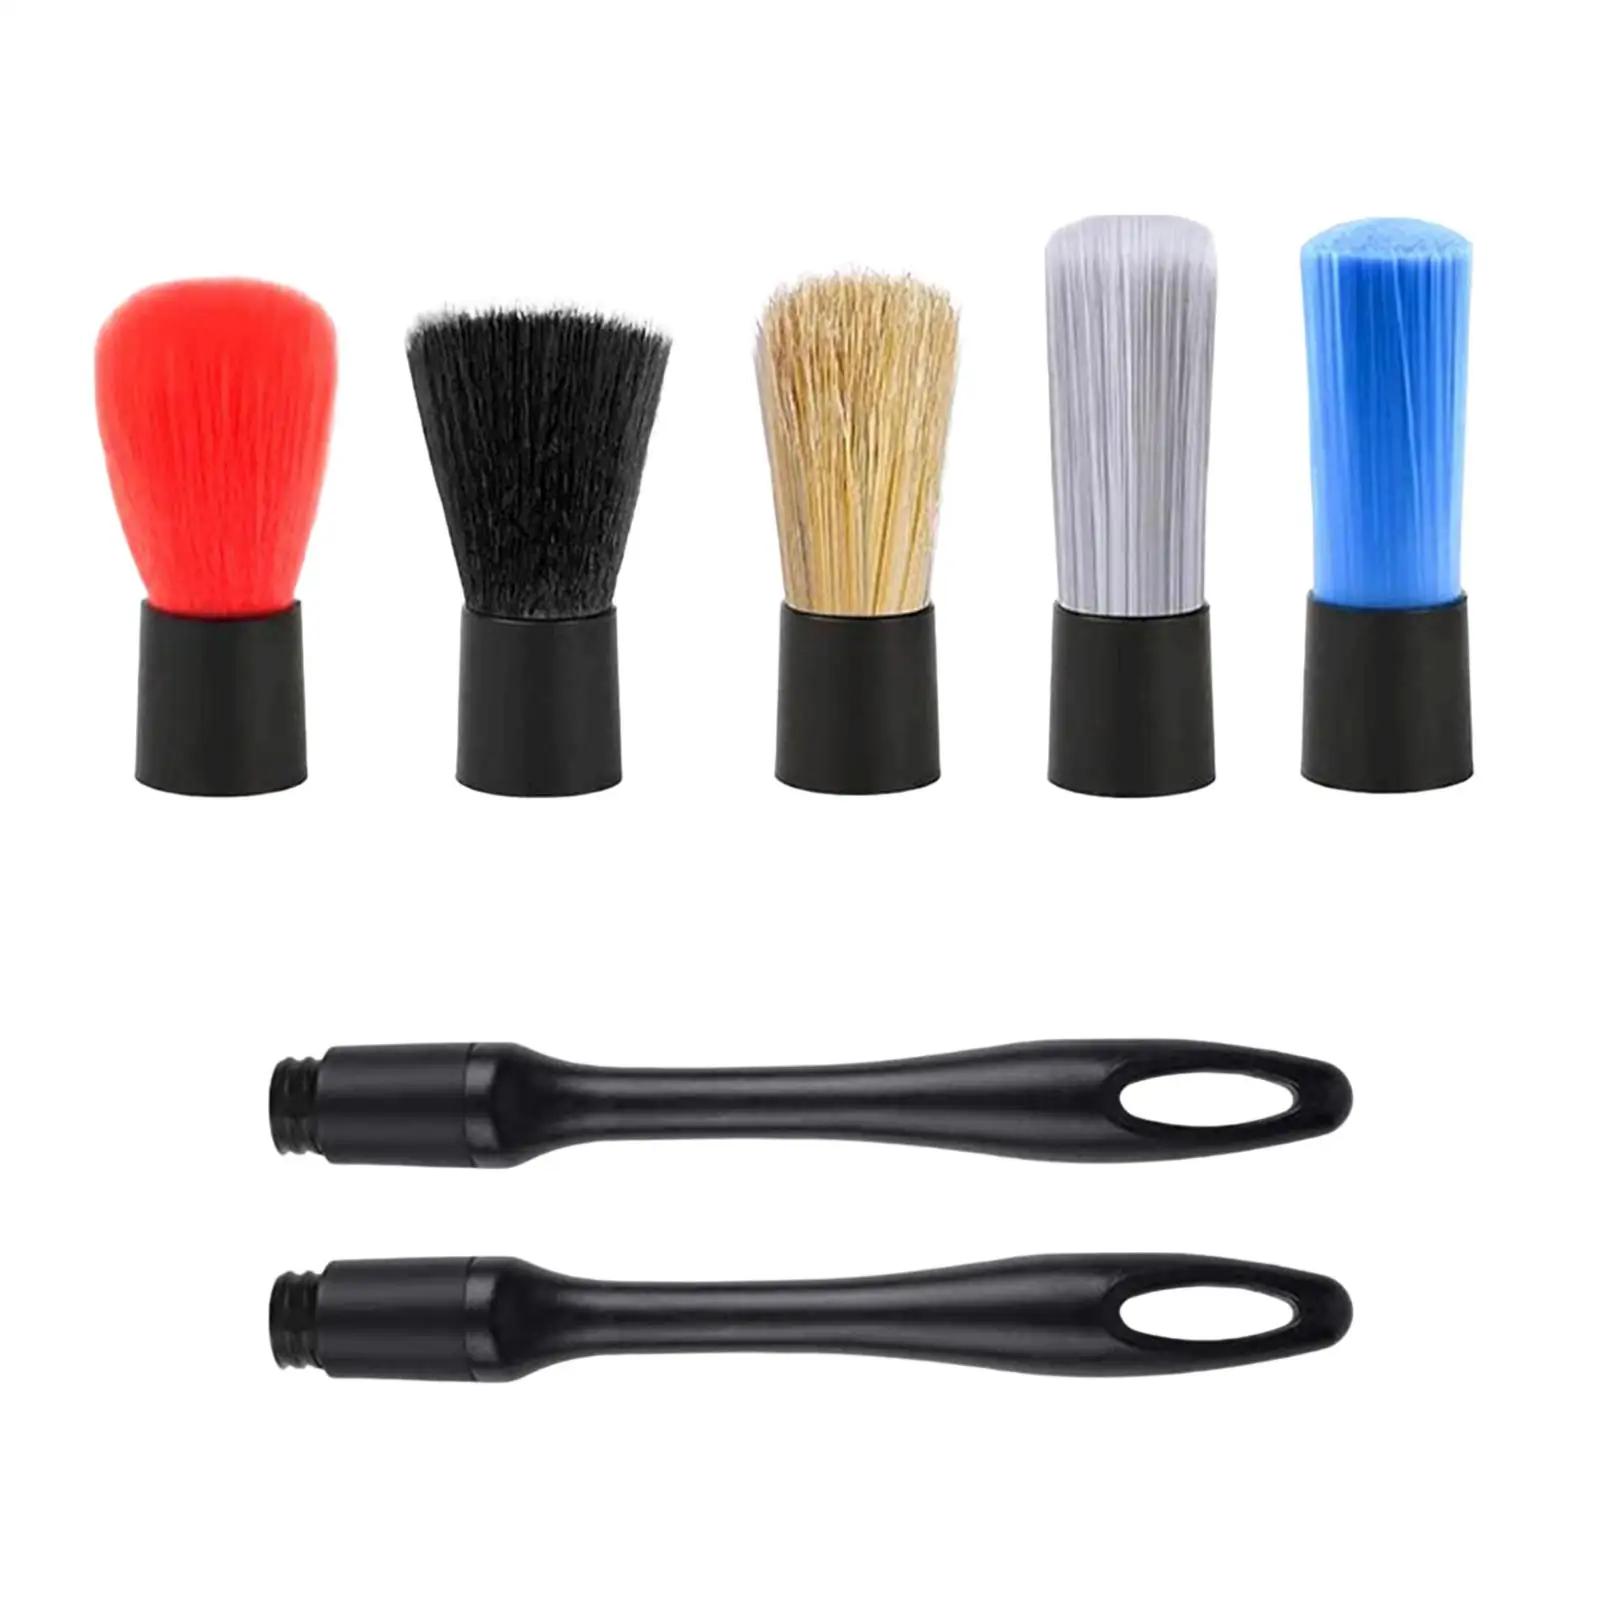 Soft Car Detail Brushes Accessories Durable Car Interior Cleaning set for